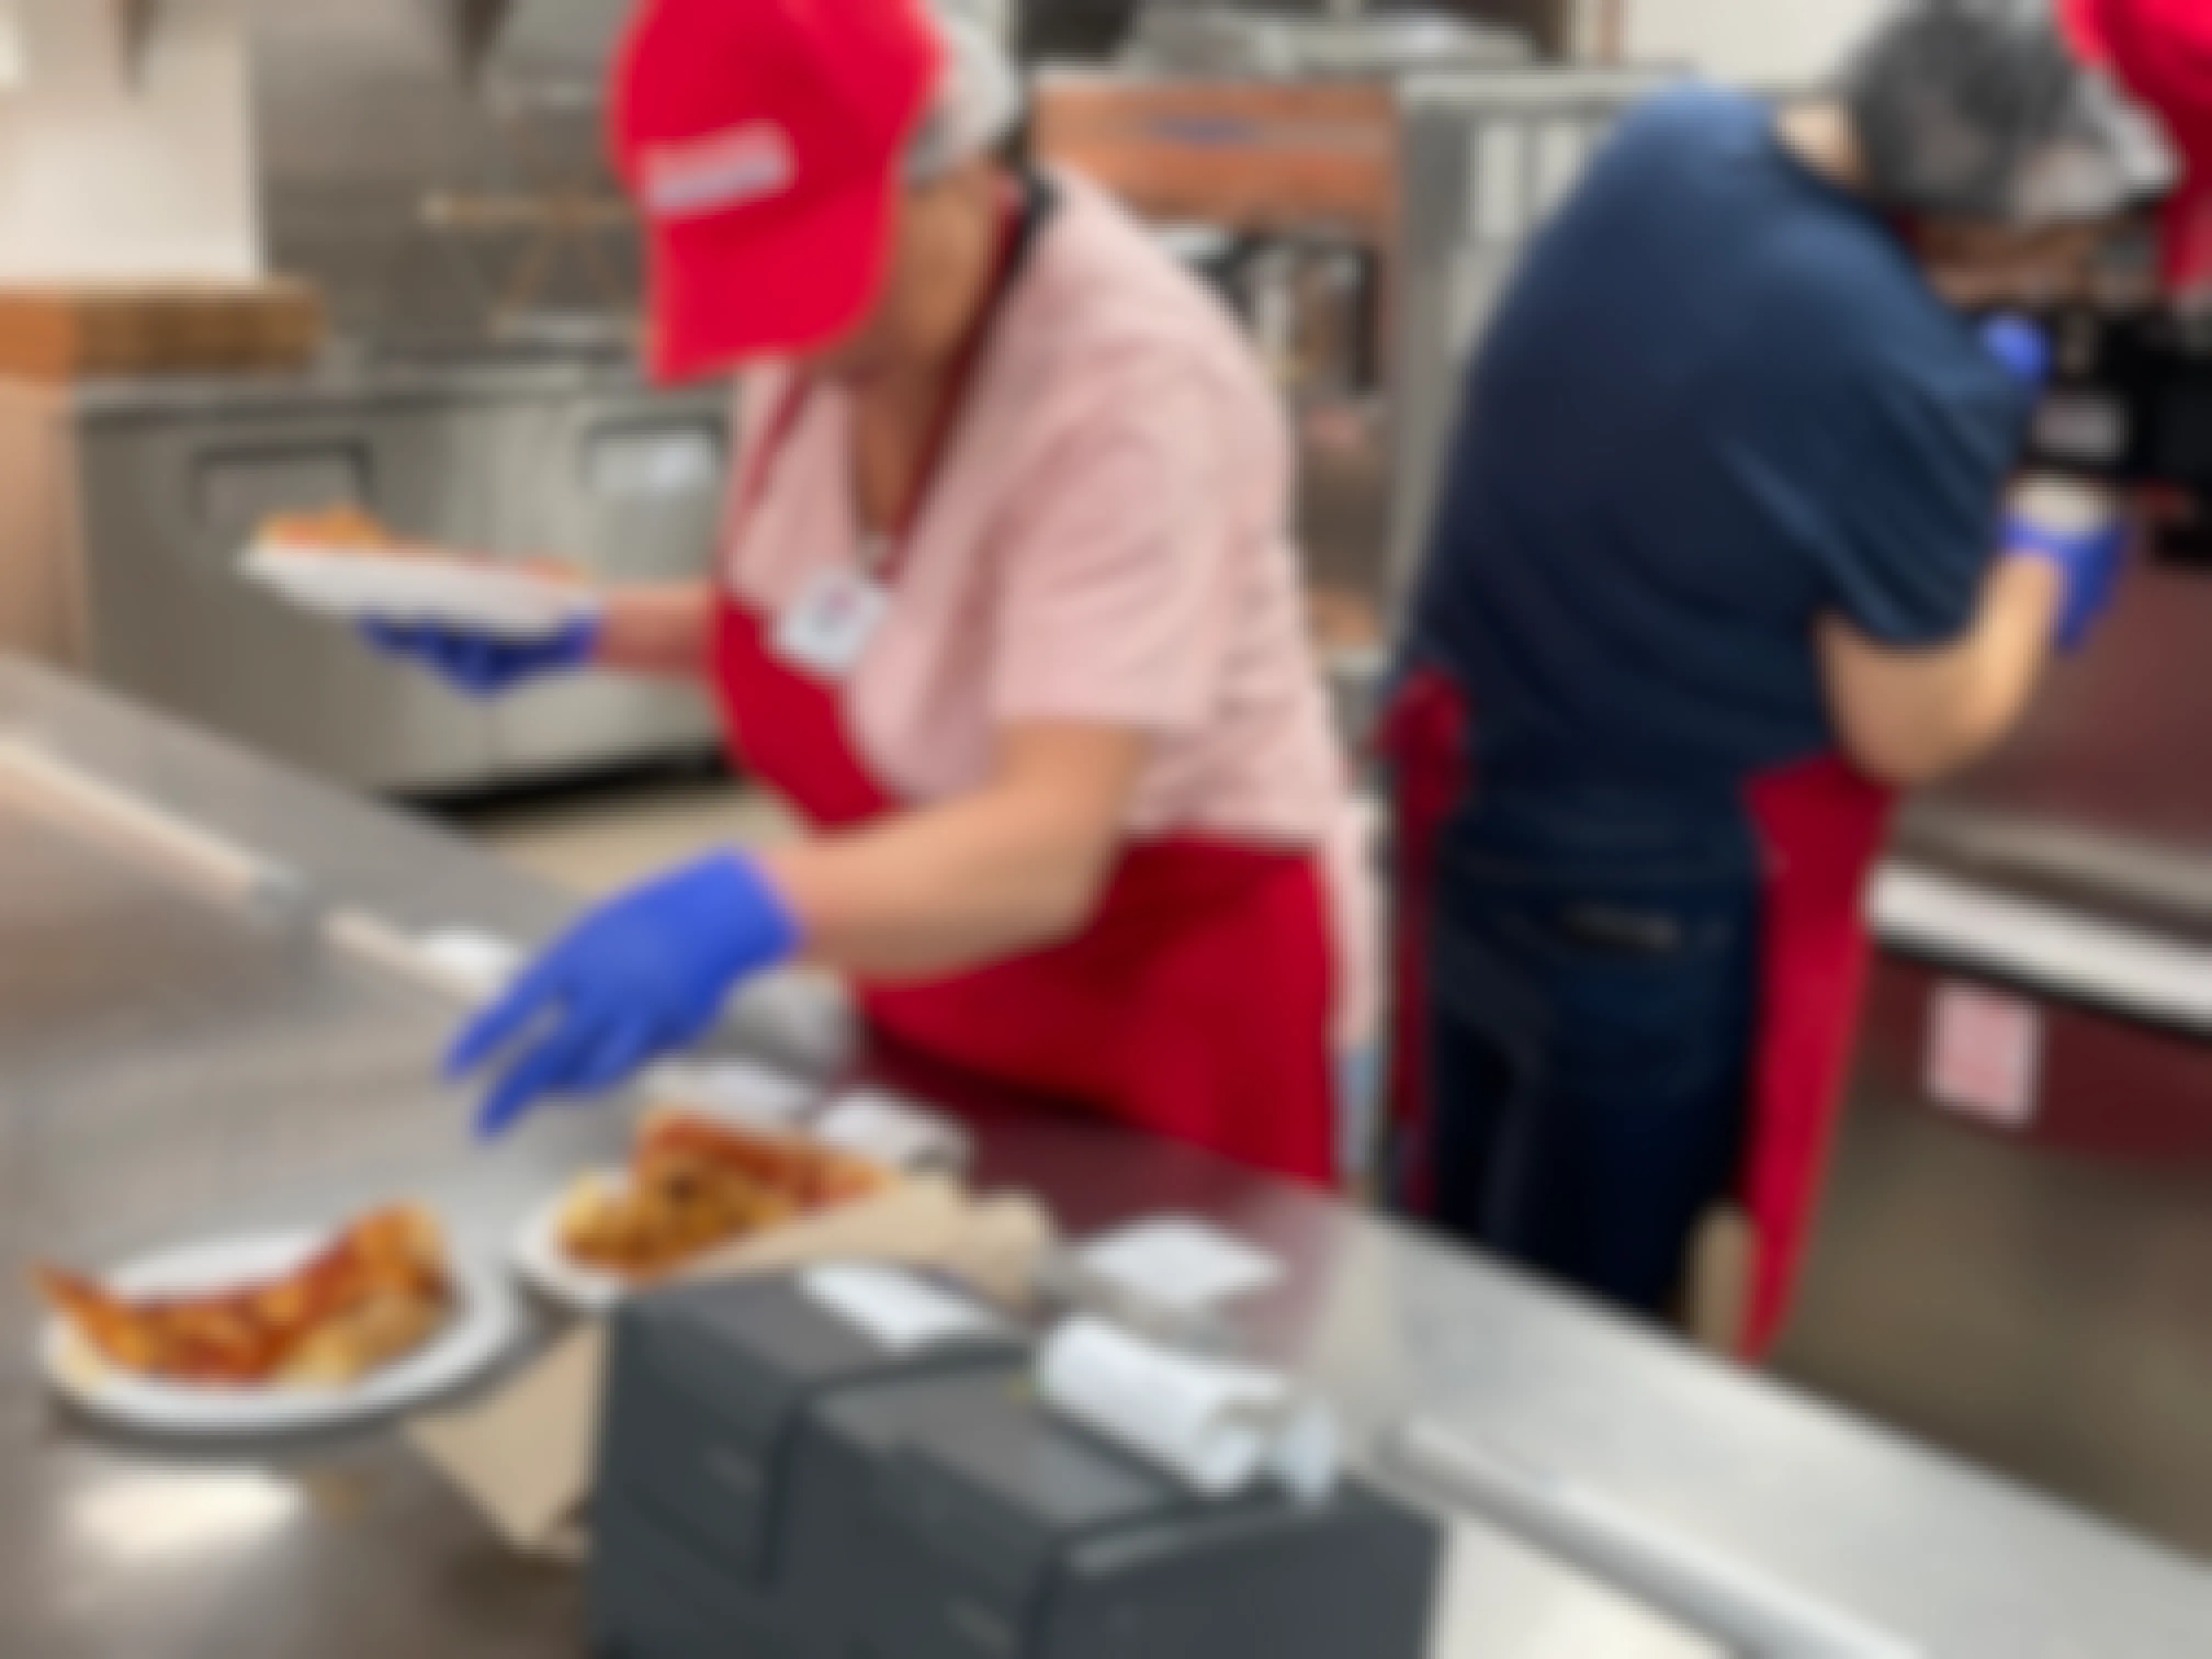 Costco employees preparing an order of pizza slices at the Costco food court